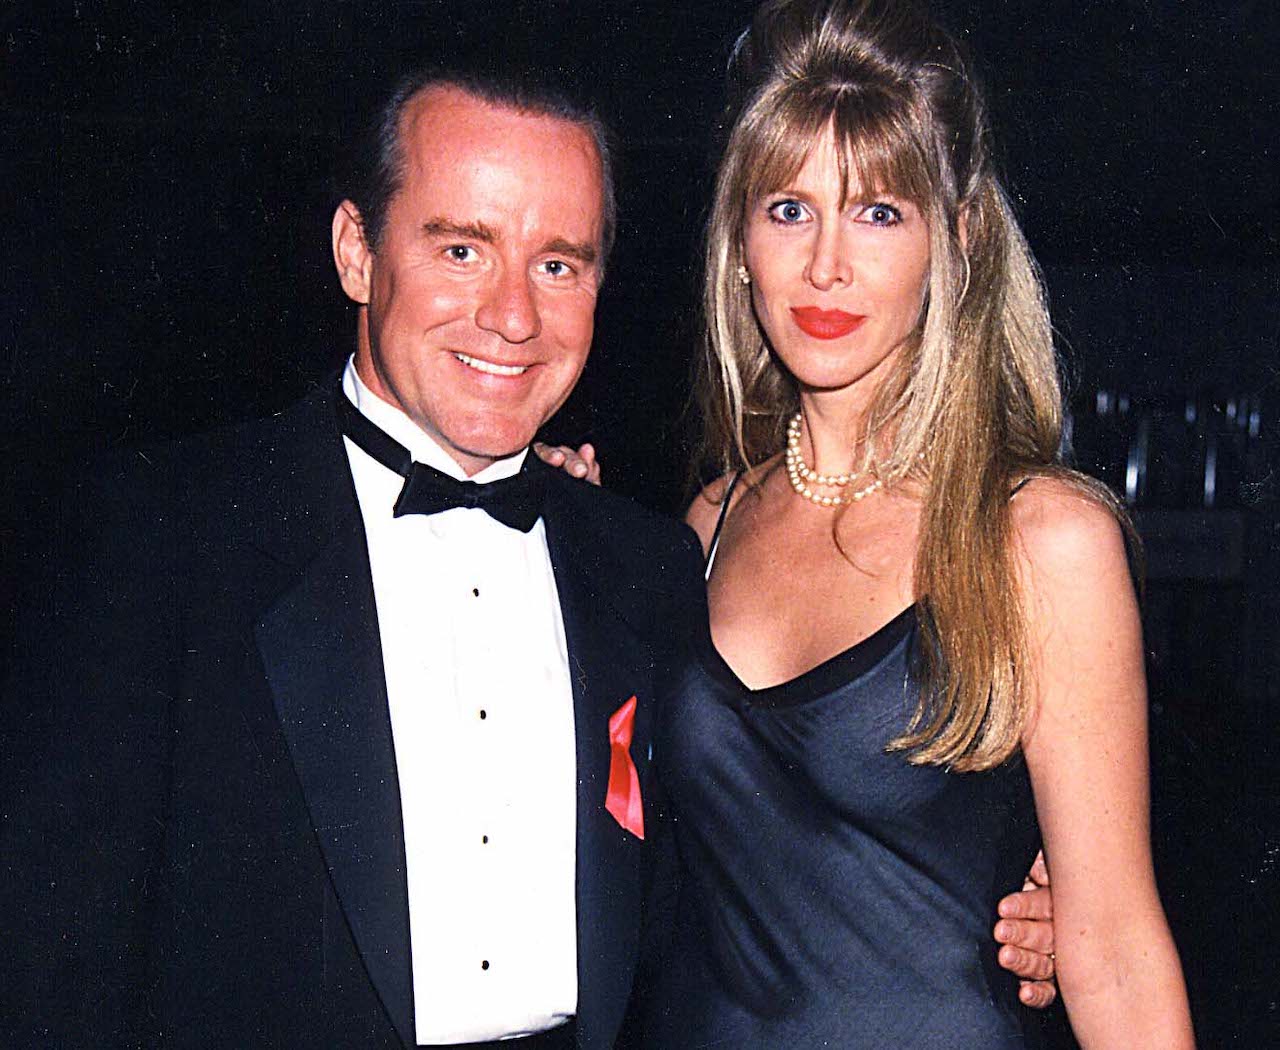 Phil Hartman in a tuxedo, standing with his wife, Brynn, in a black dress